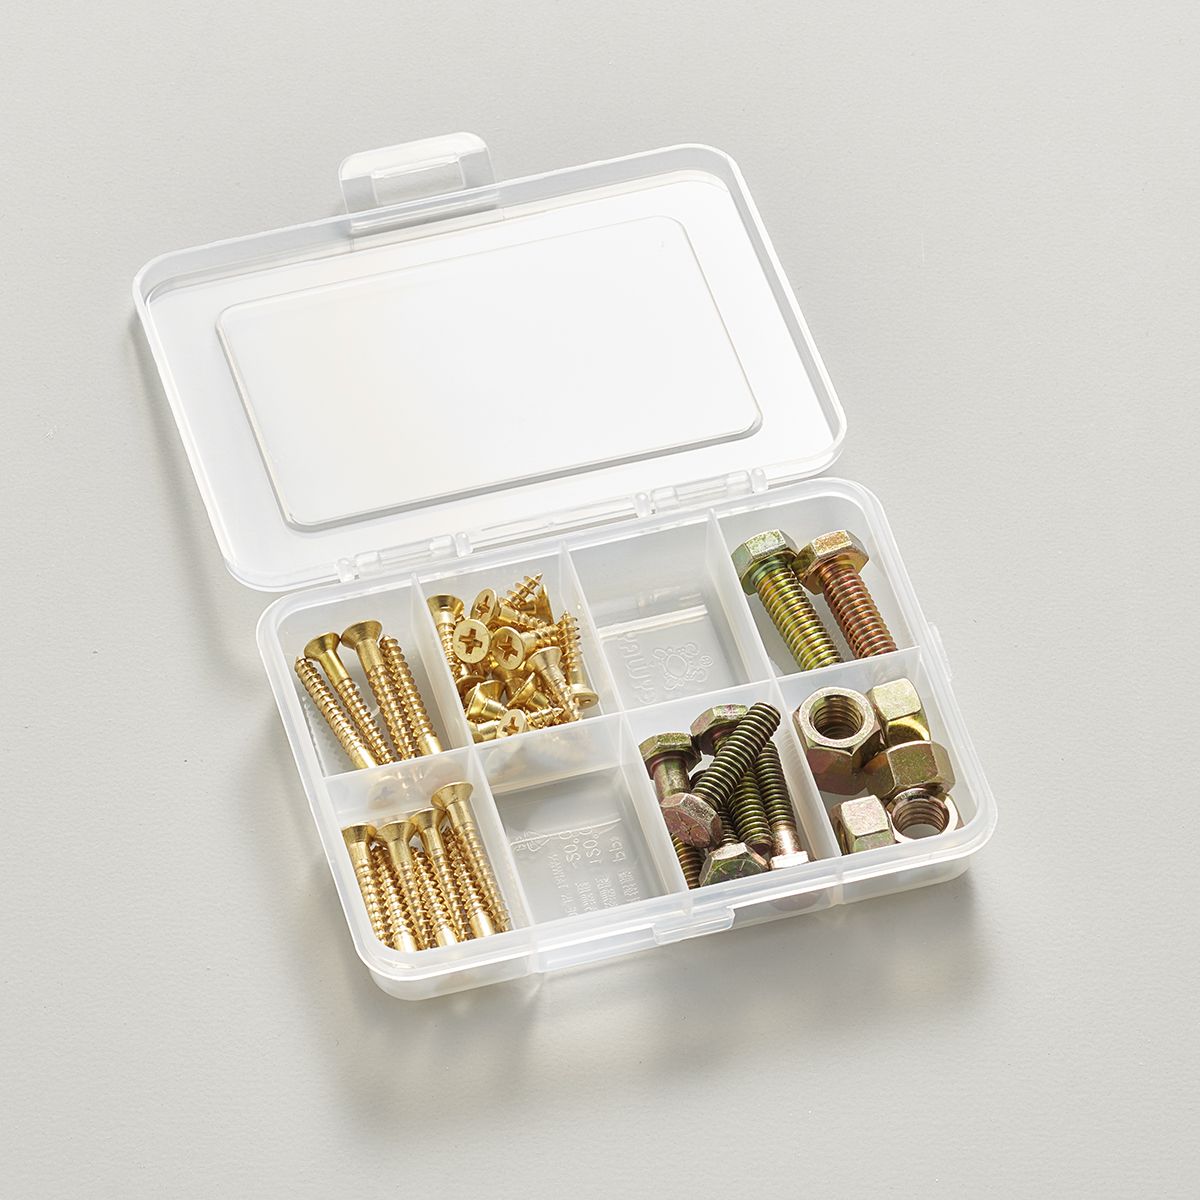 8-Compartment Box | The Container Store